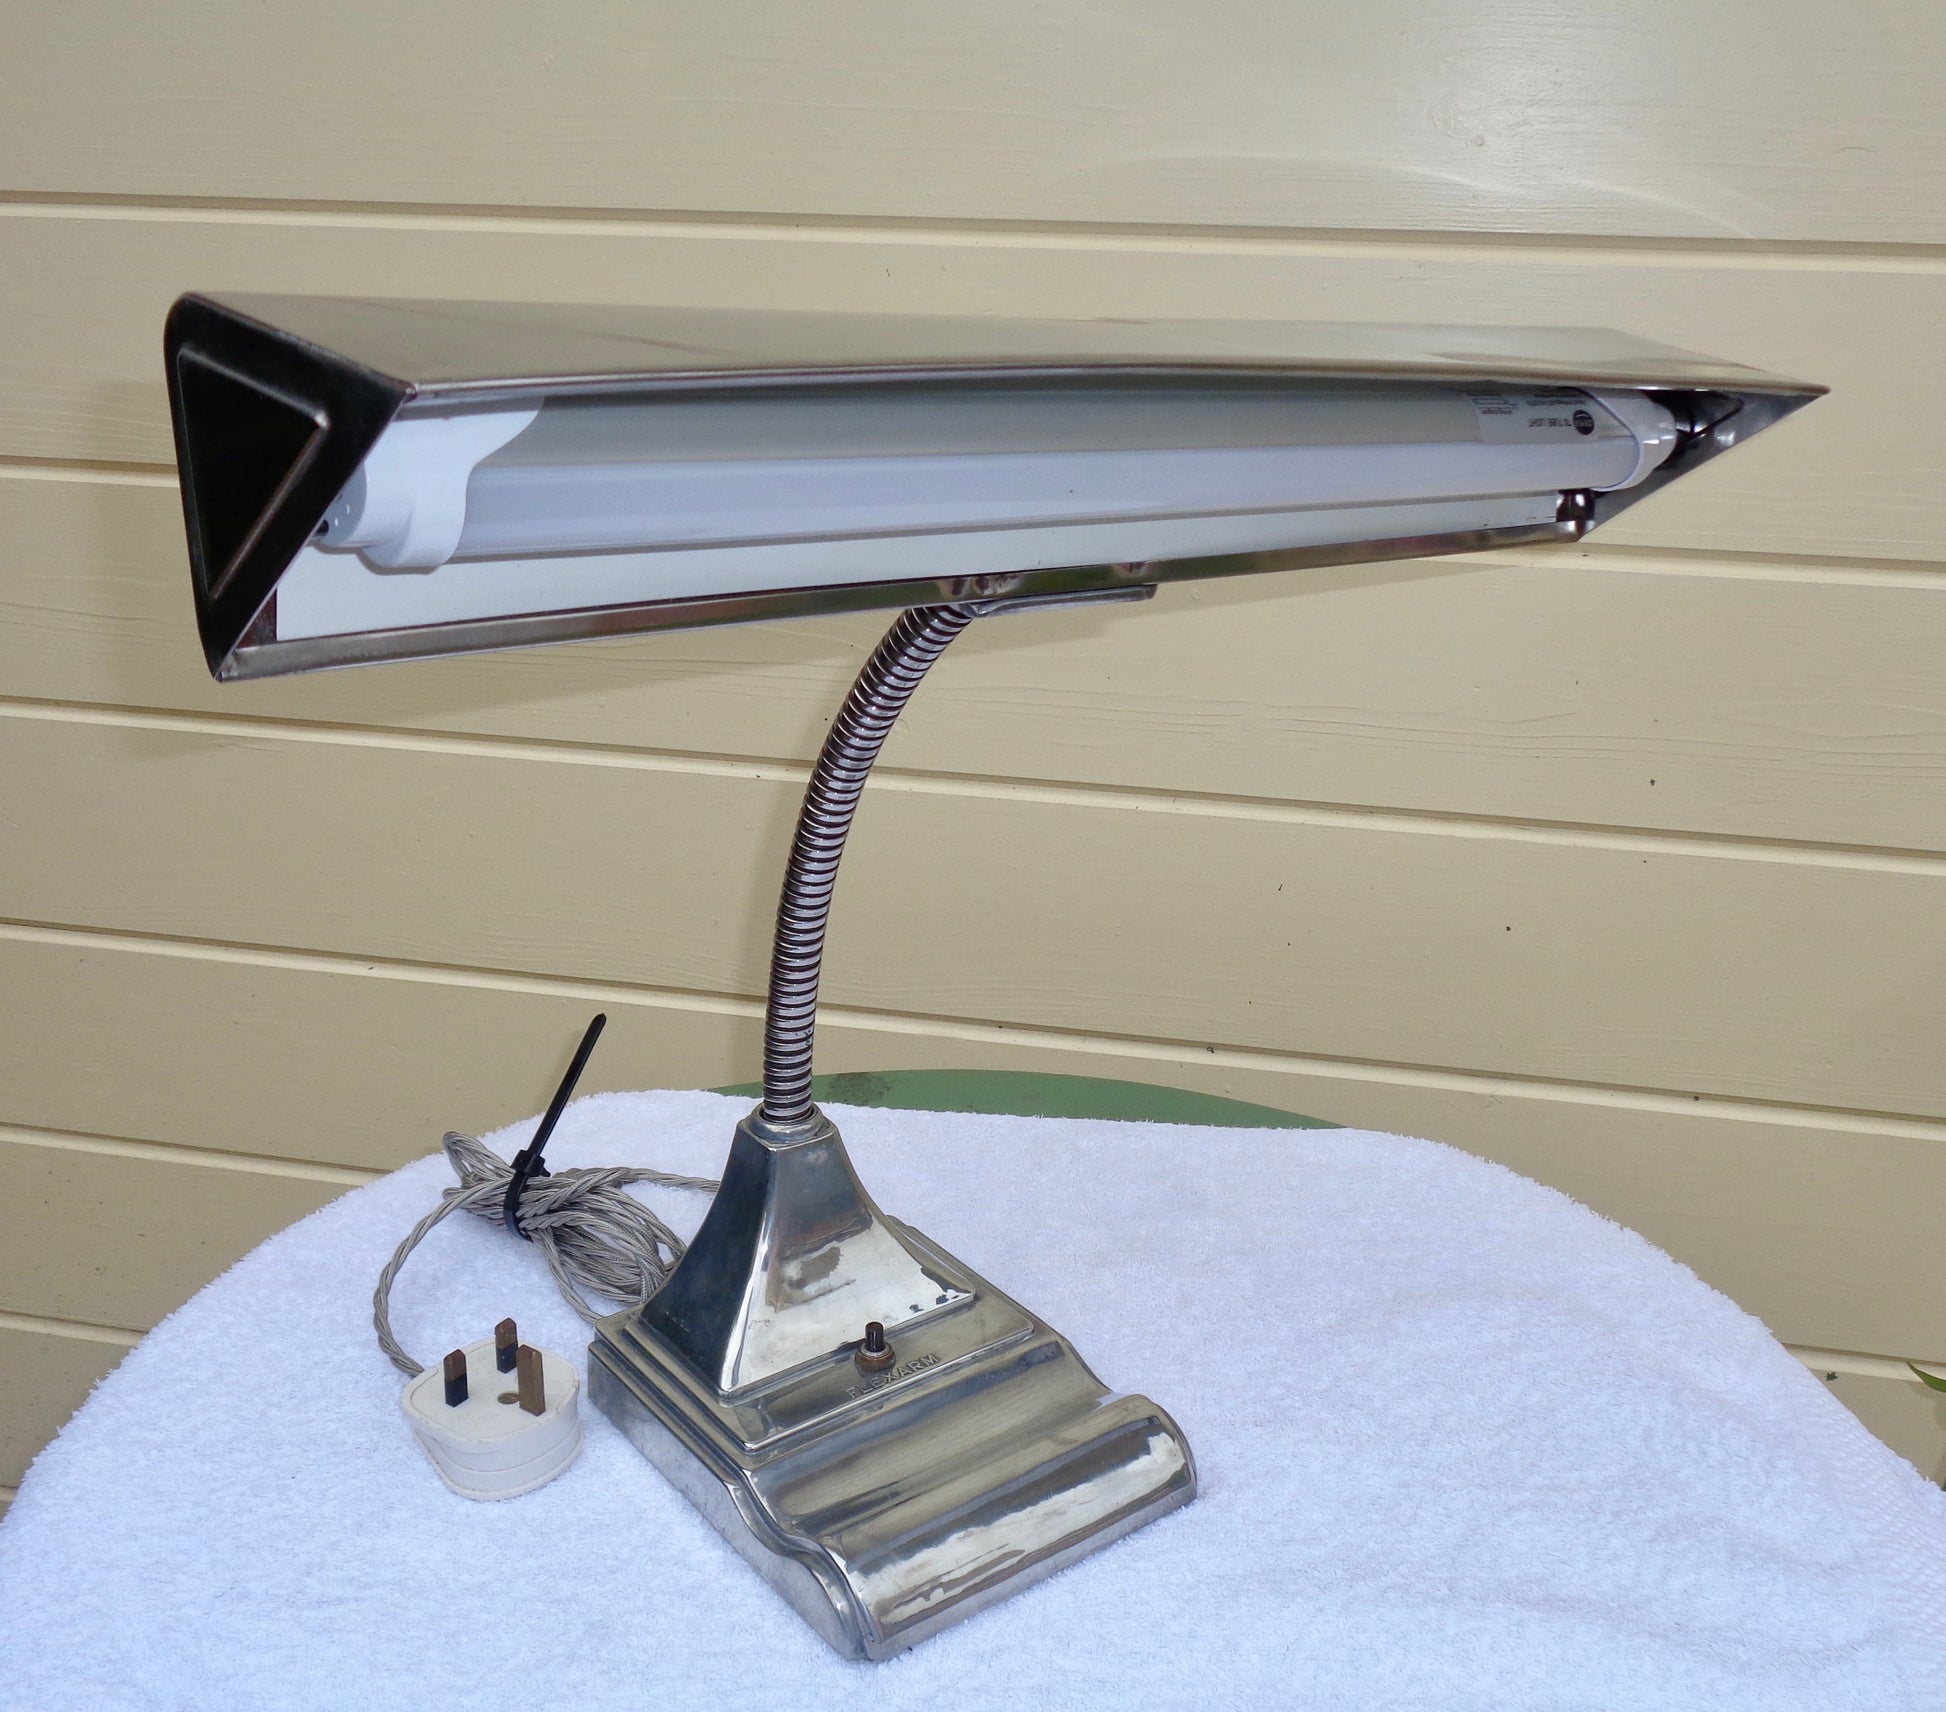 Vintage Fluorescent Flexarm Desk Lamp By The Art Speciality Co. Chicago 